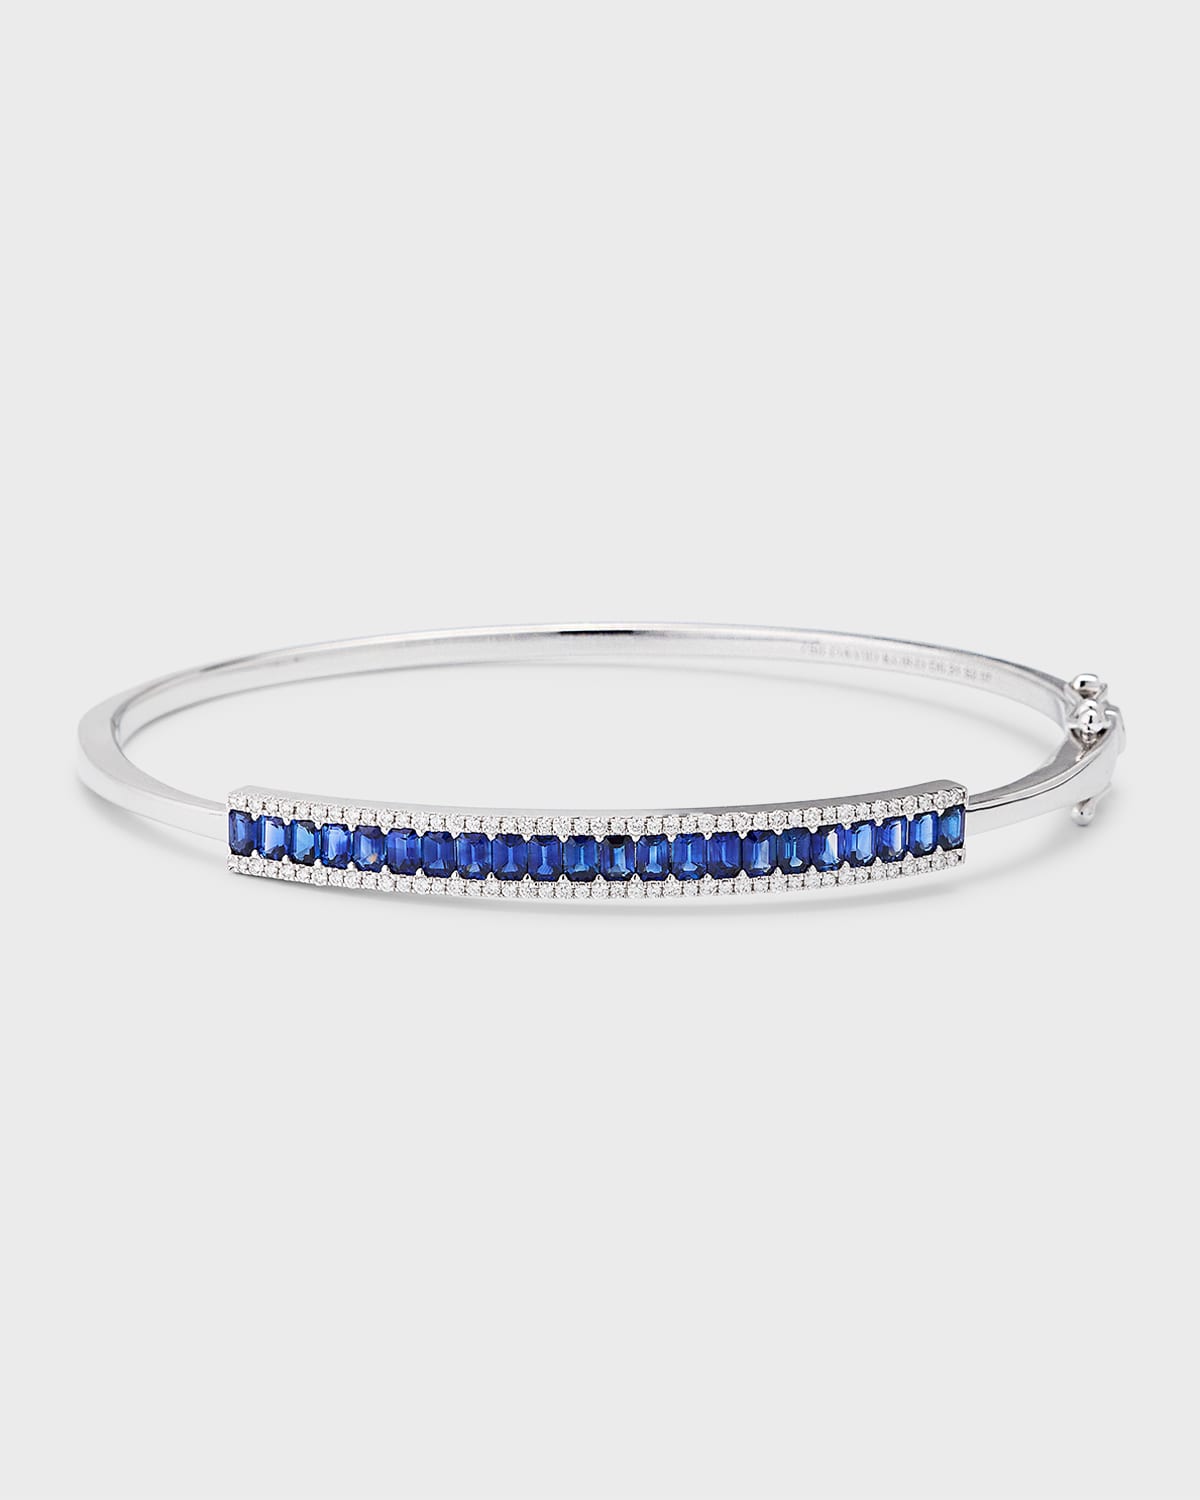 18K White Gold Bangle with Blue Sapphires and Diamonds